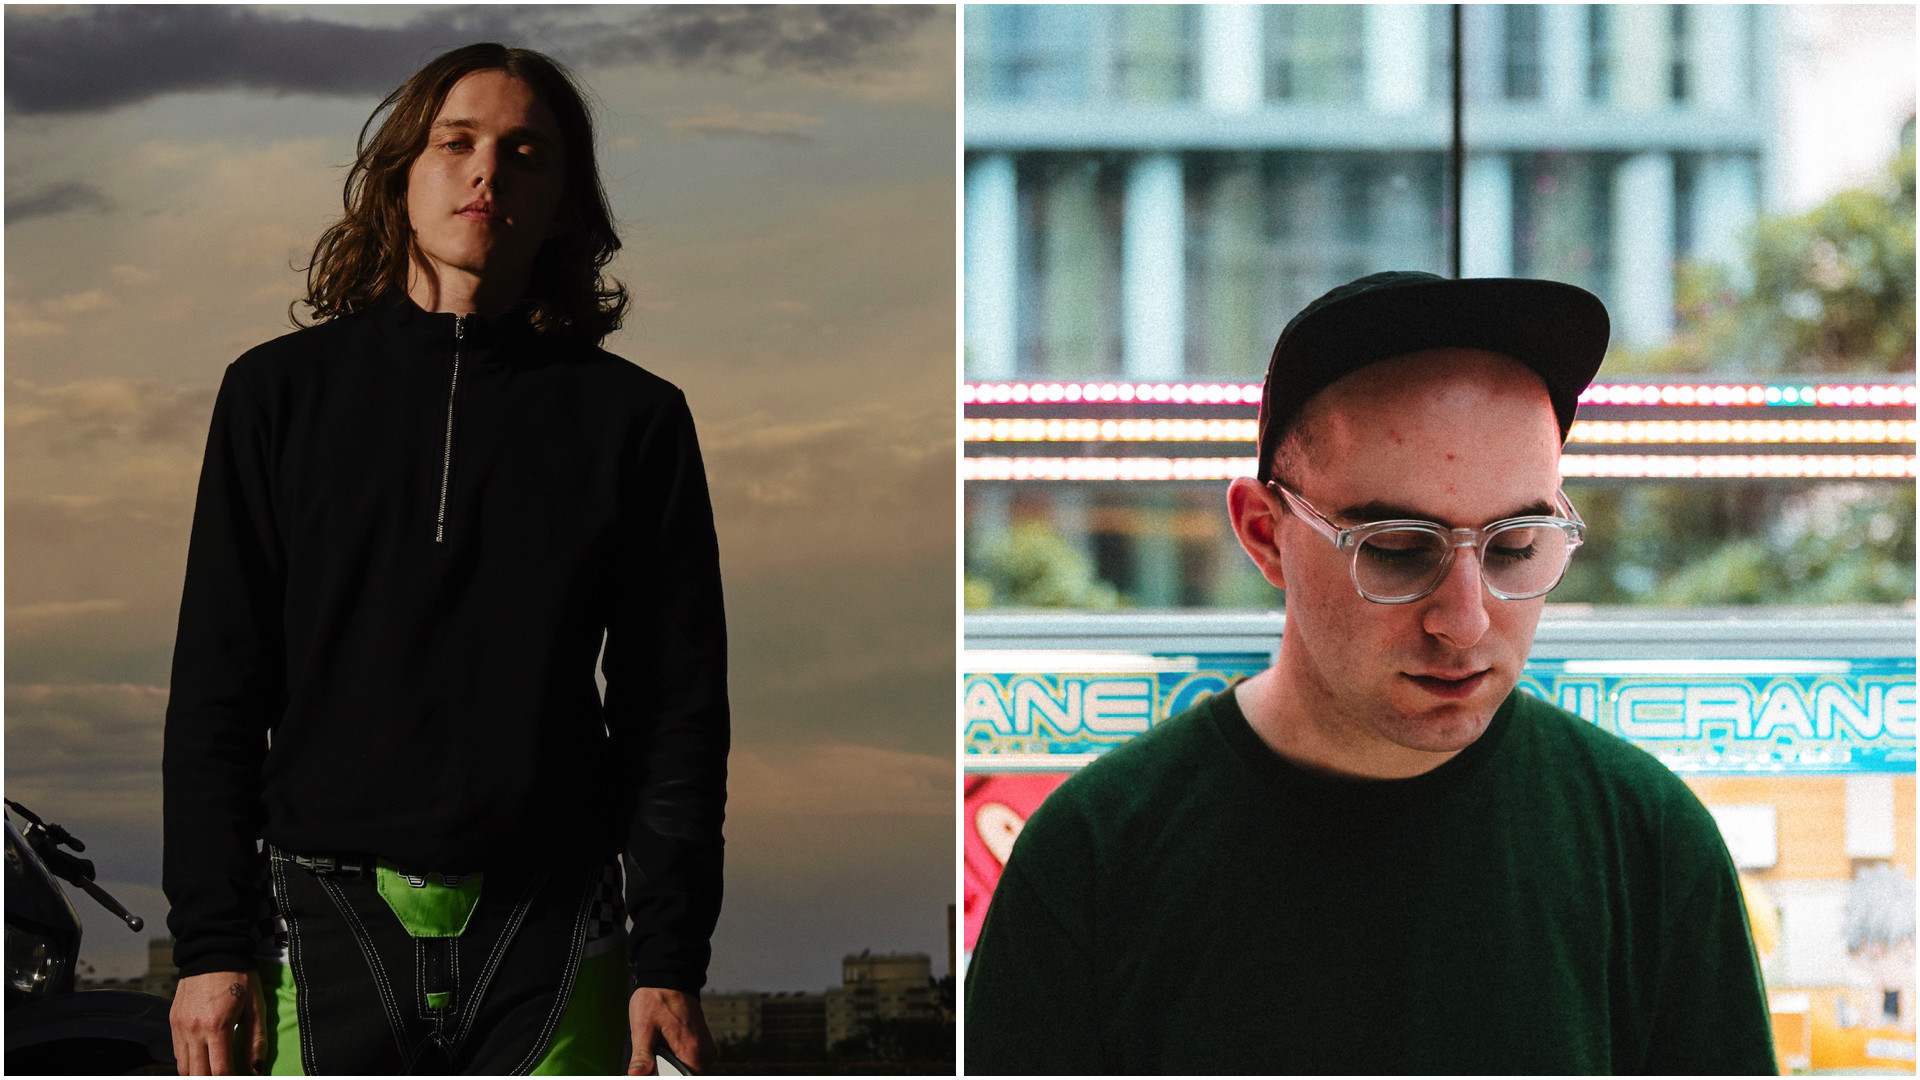 1920x1080 Allday & Japanese Wallpaper Join Forces For New Single & Tour - Music Feeds